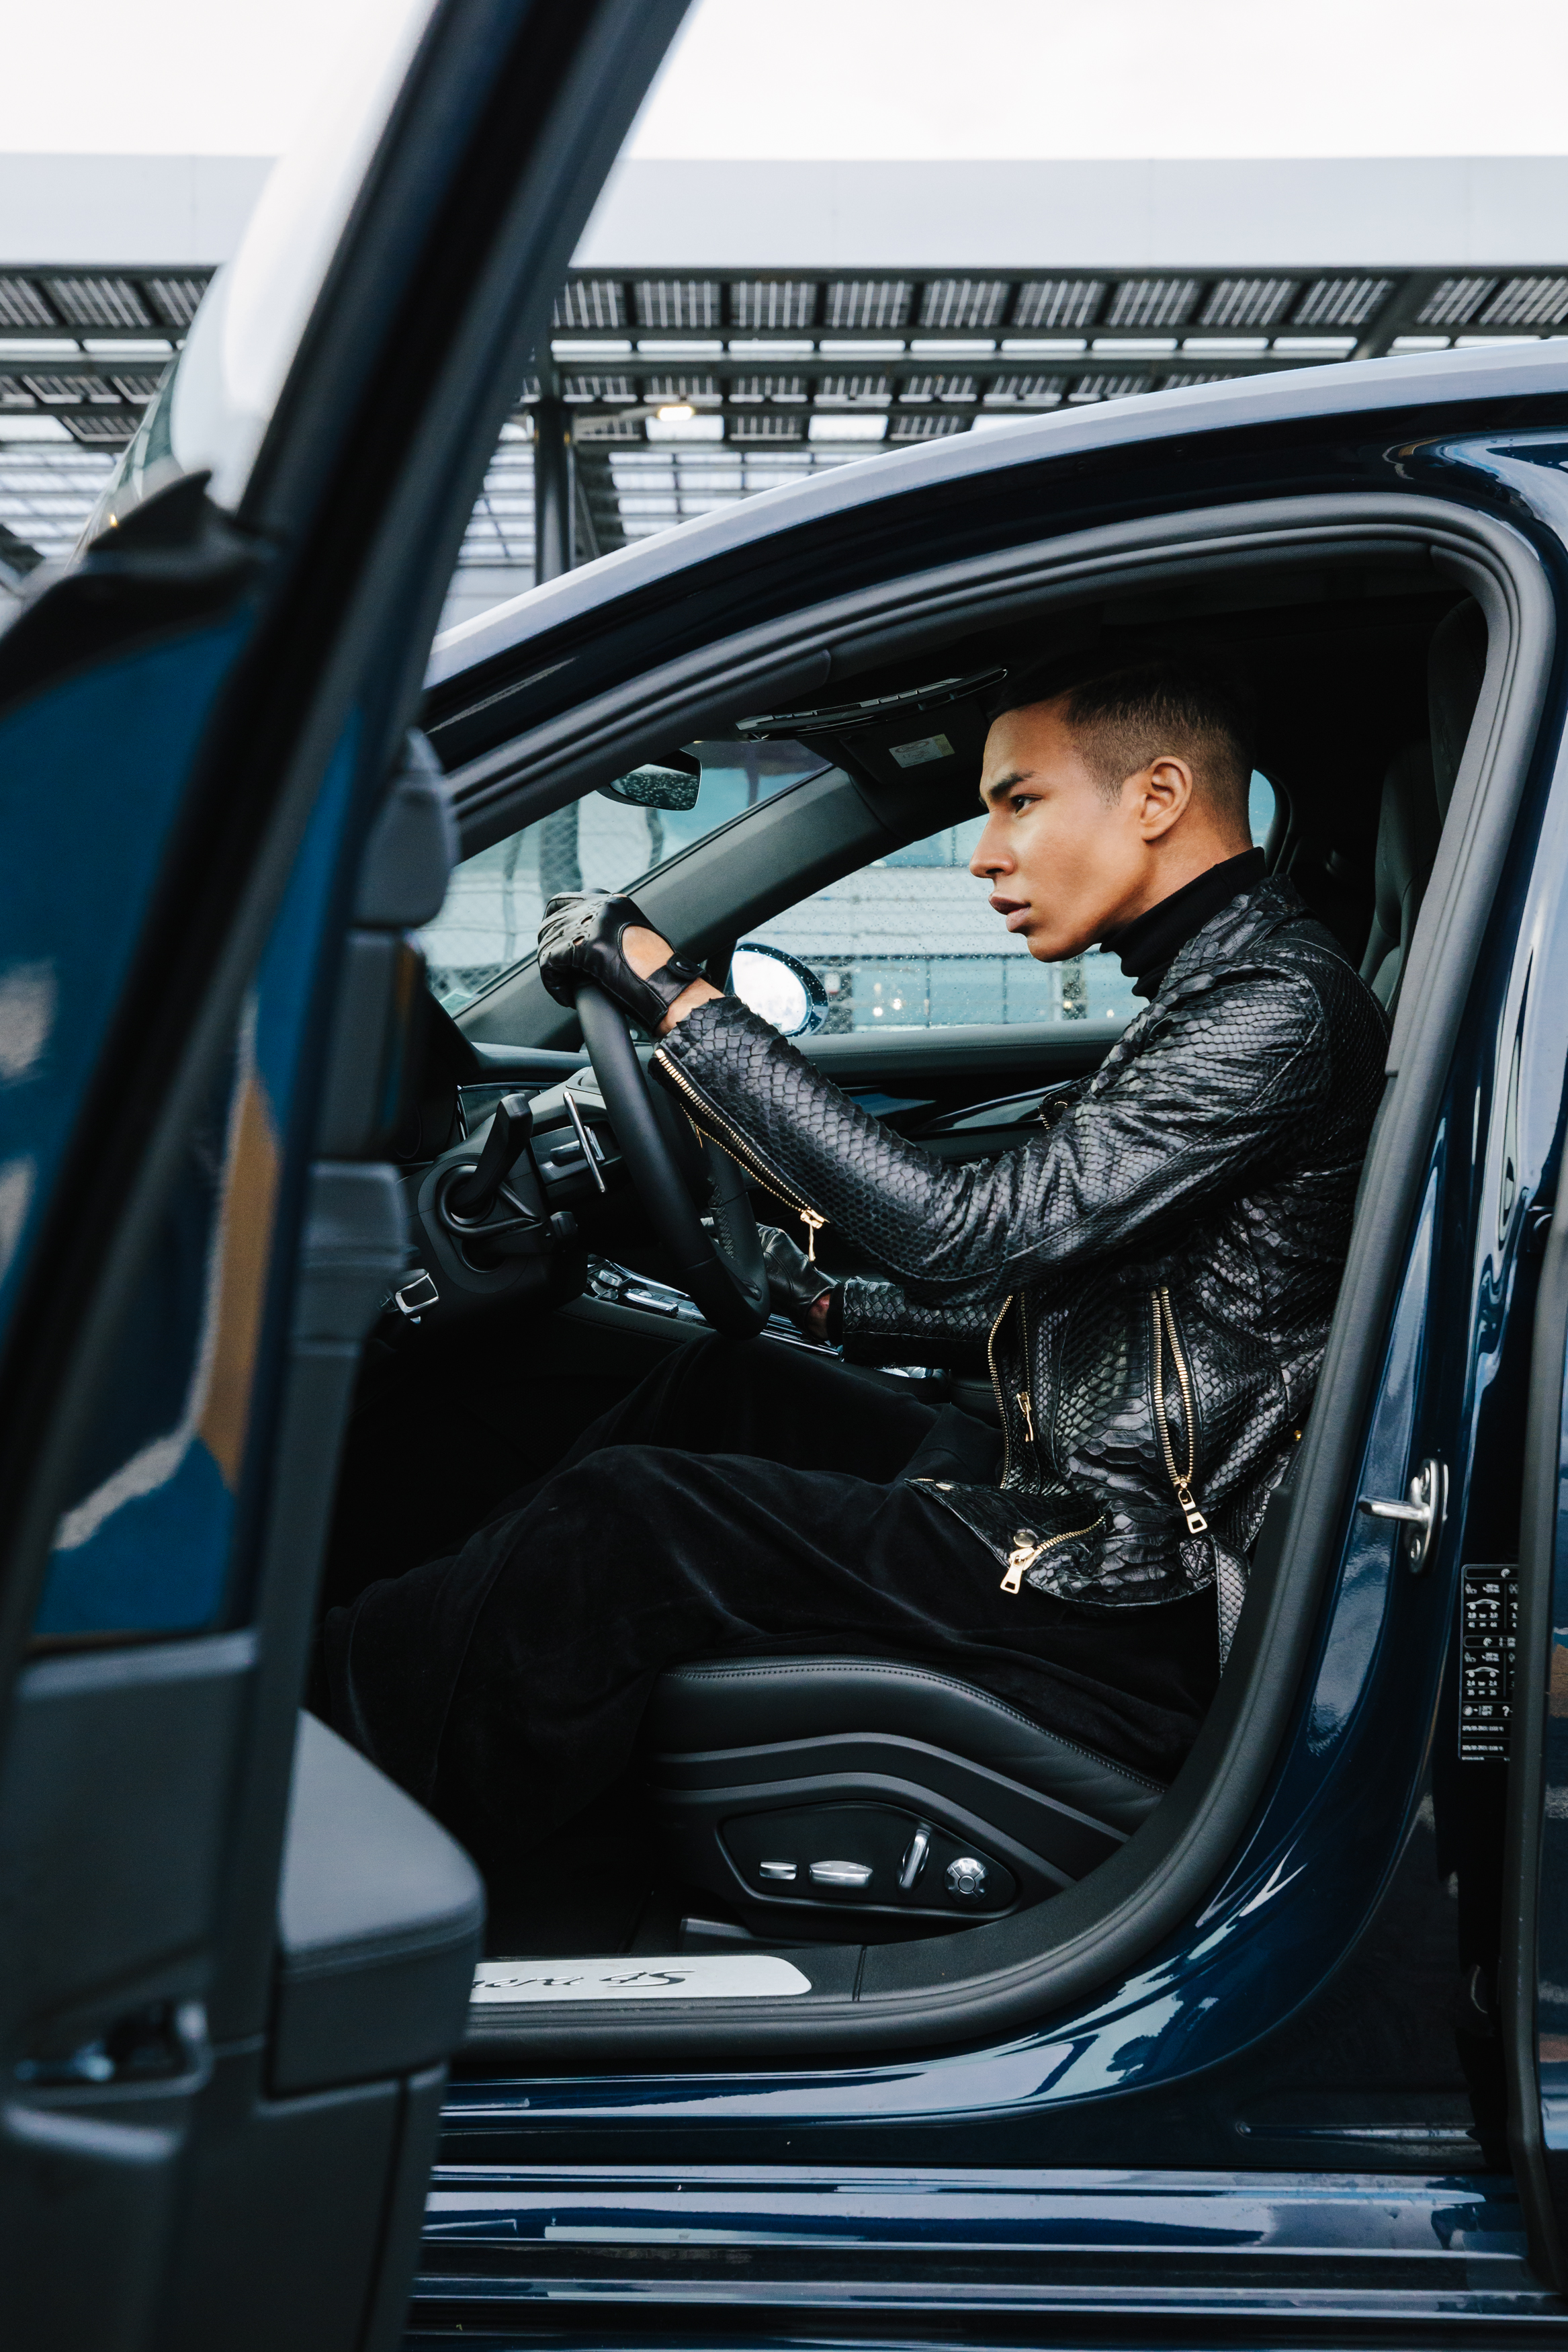 Olivier Rousteing behind the wheel of a Porsche Panamera